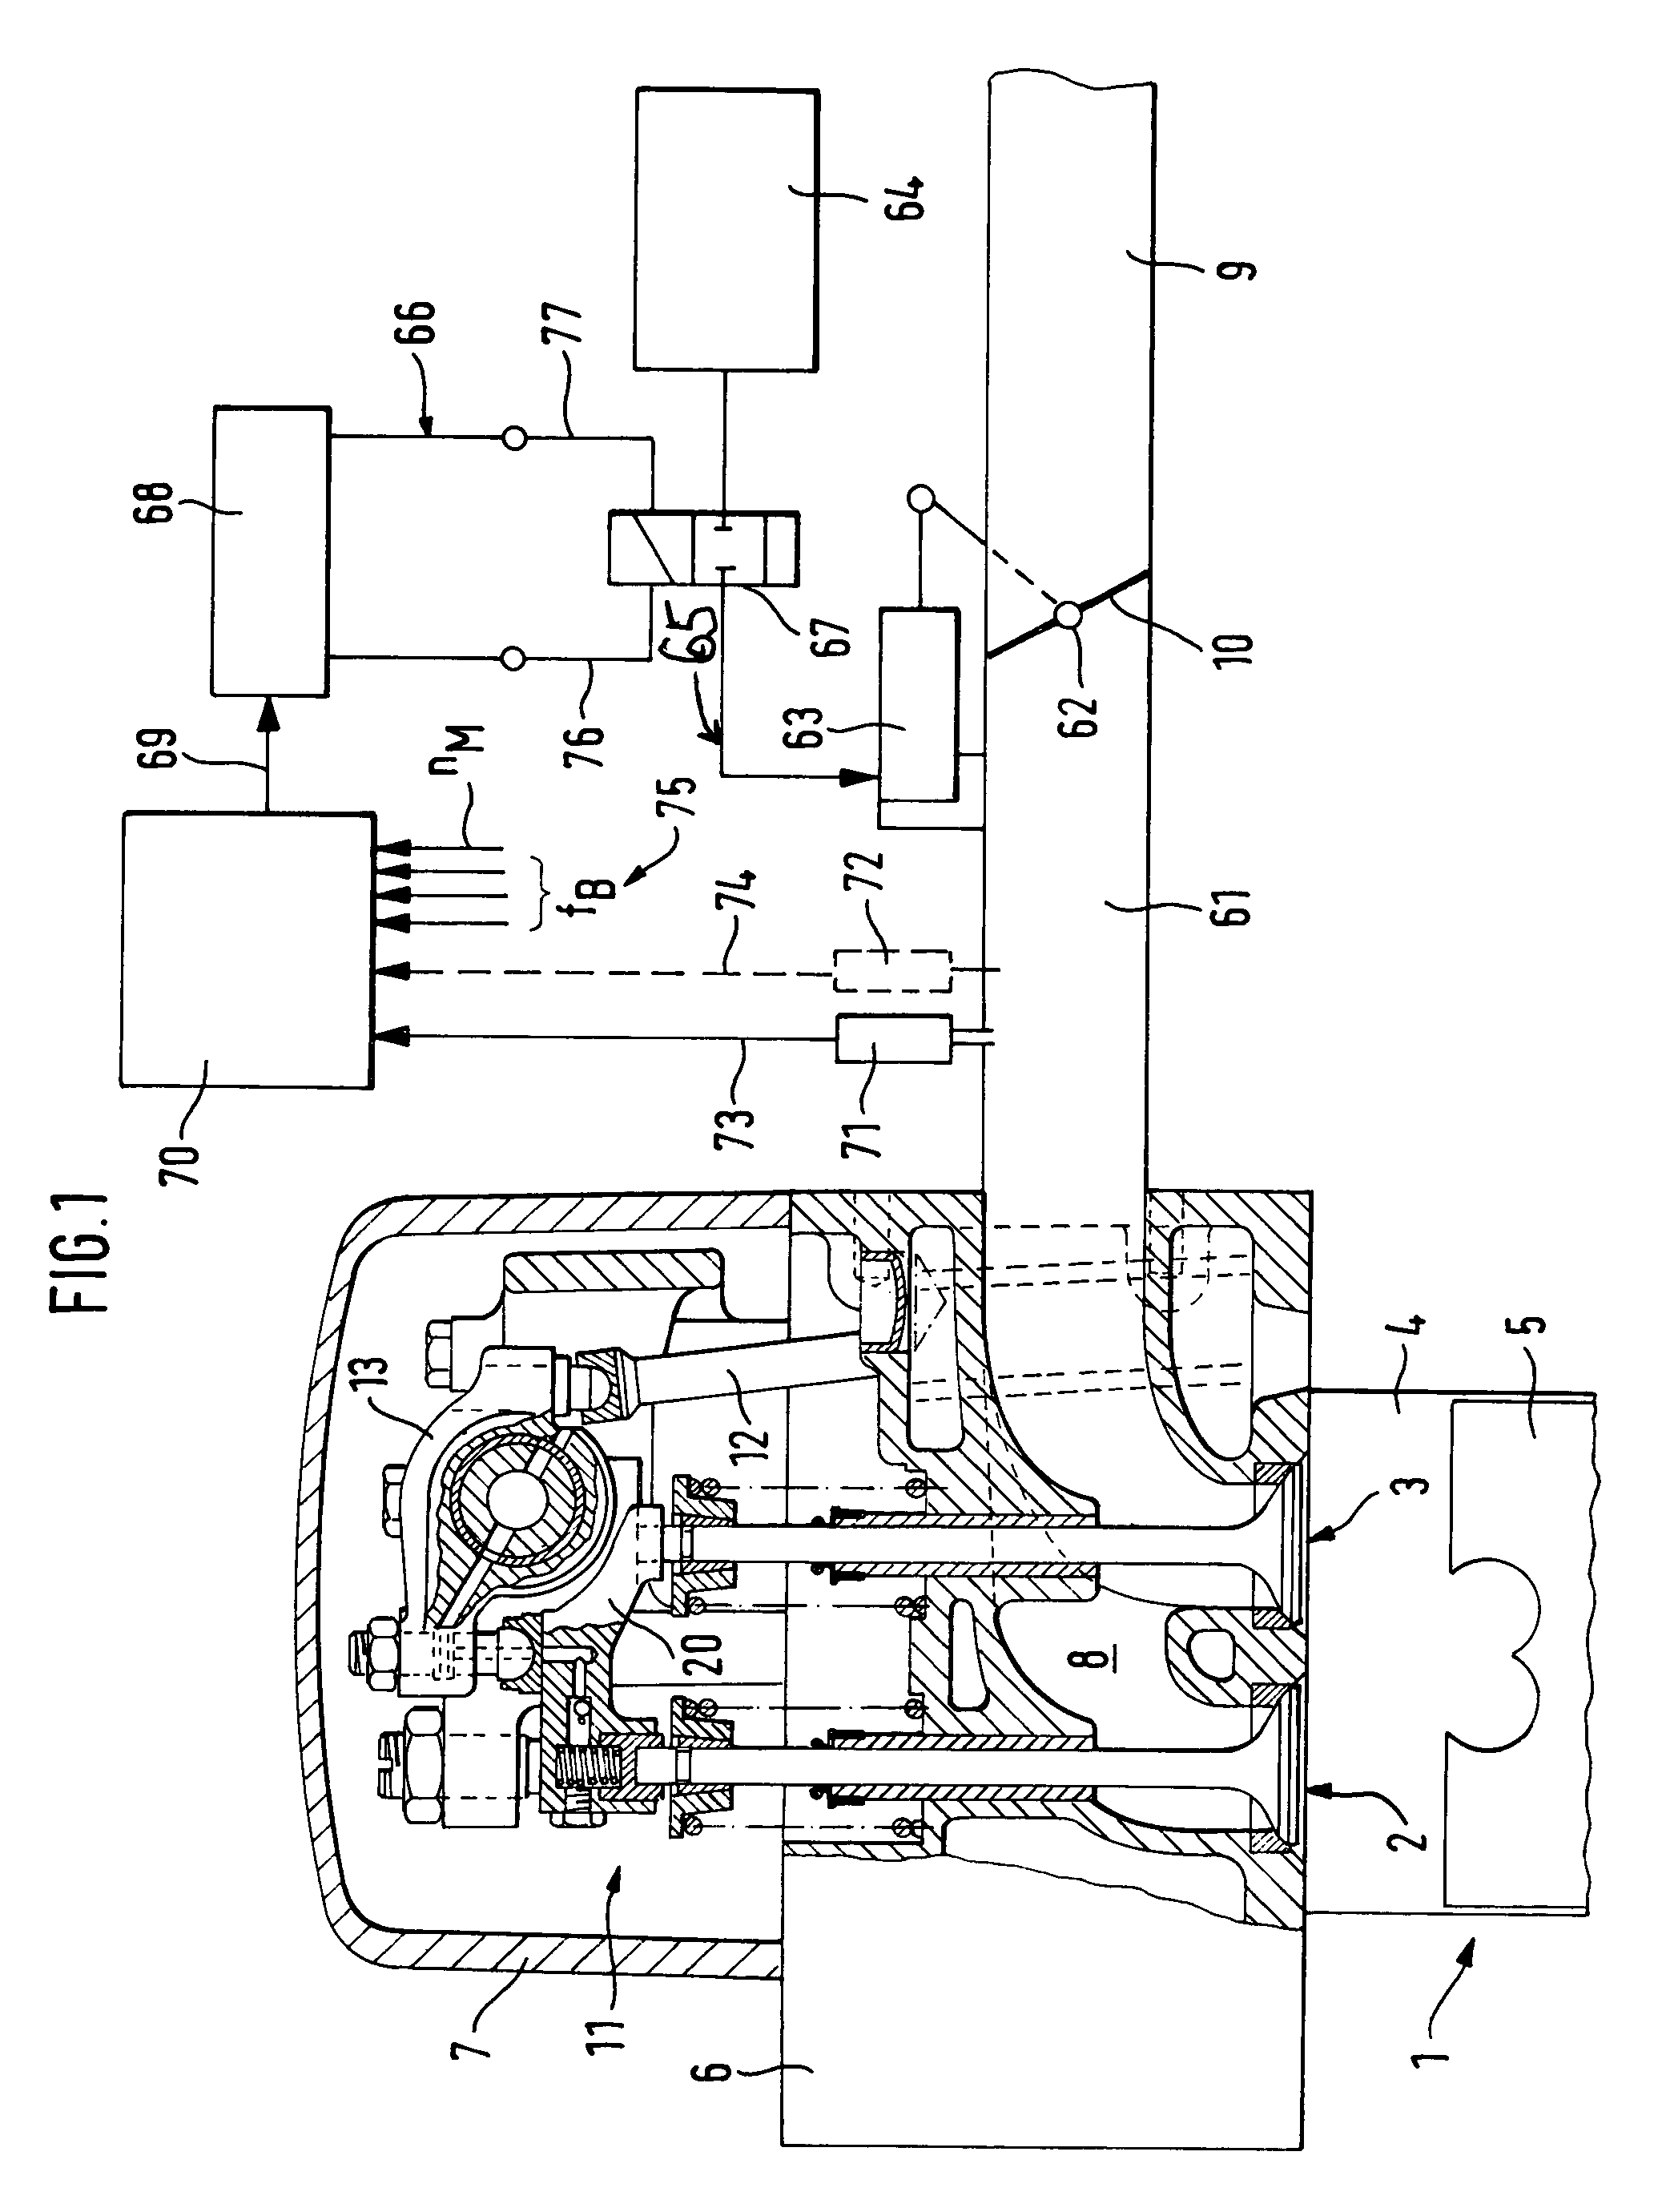 Engine air brake device for a 4-stroke reciprocating piston internal combustion engine